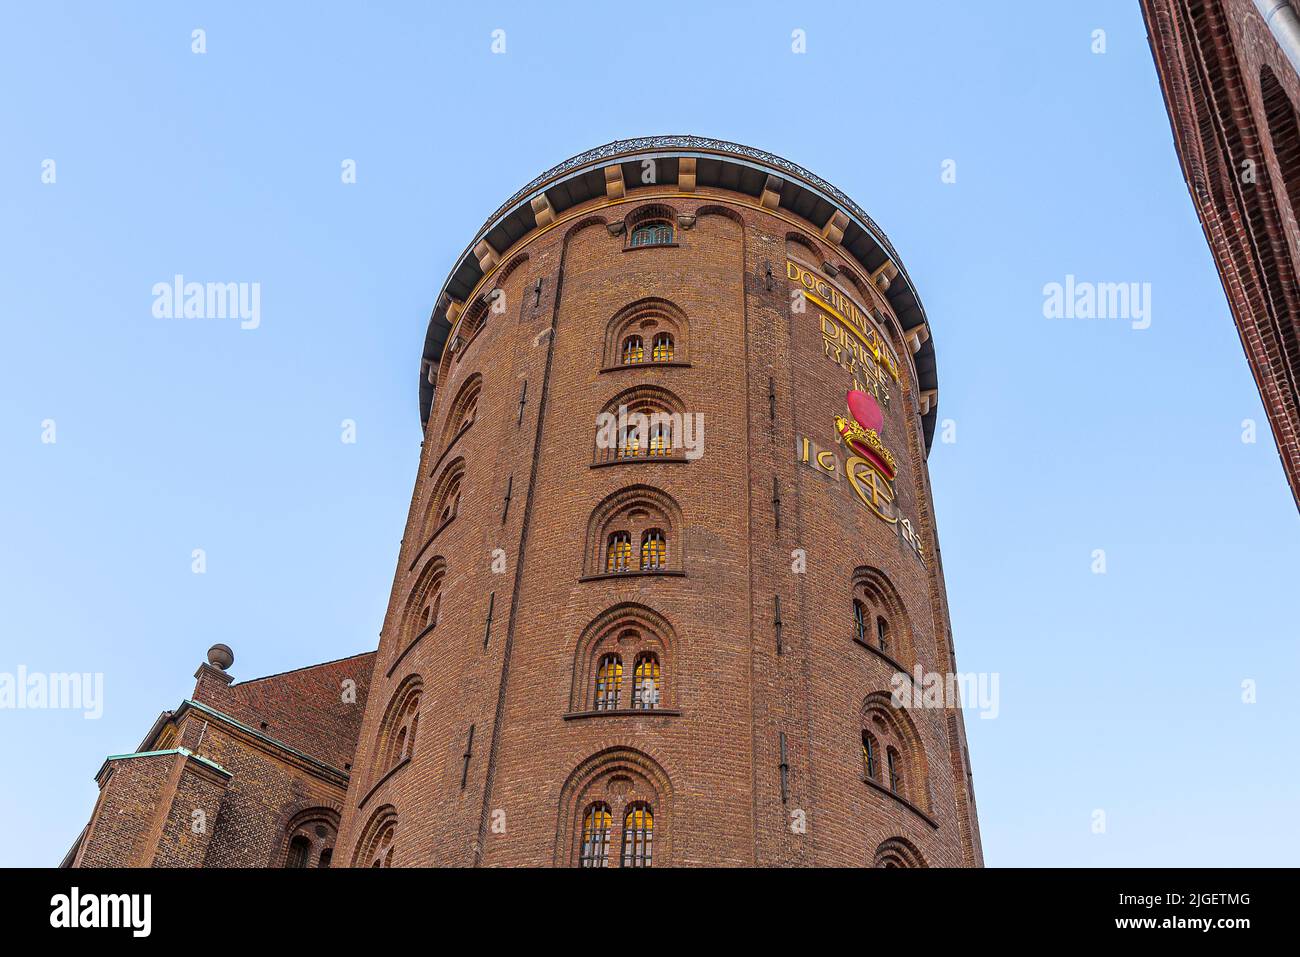 iconic building Round Tower was built by the King King Christian IV in 1637, Copenhagen, September 6, 2021 Stock Photo